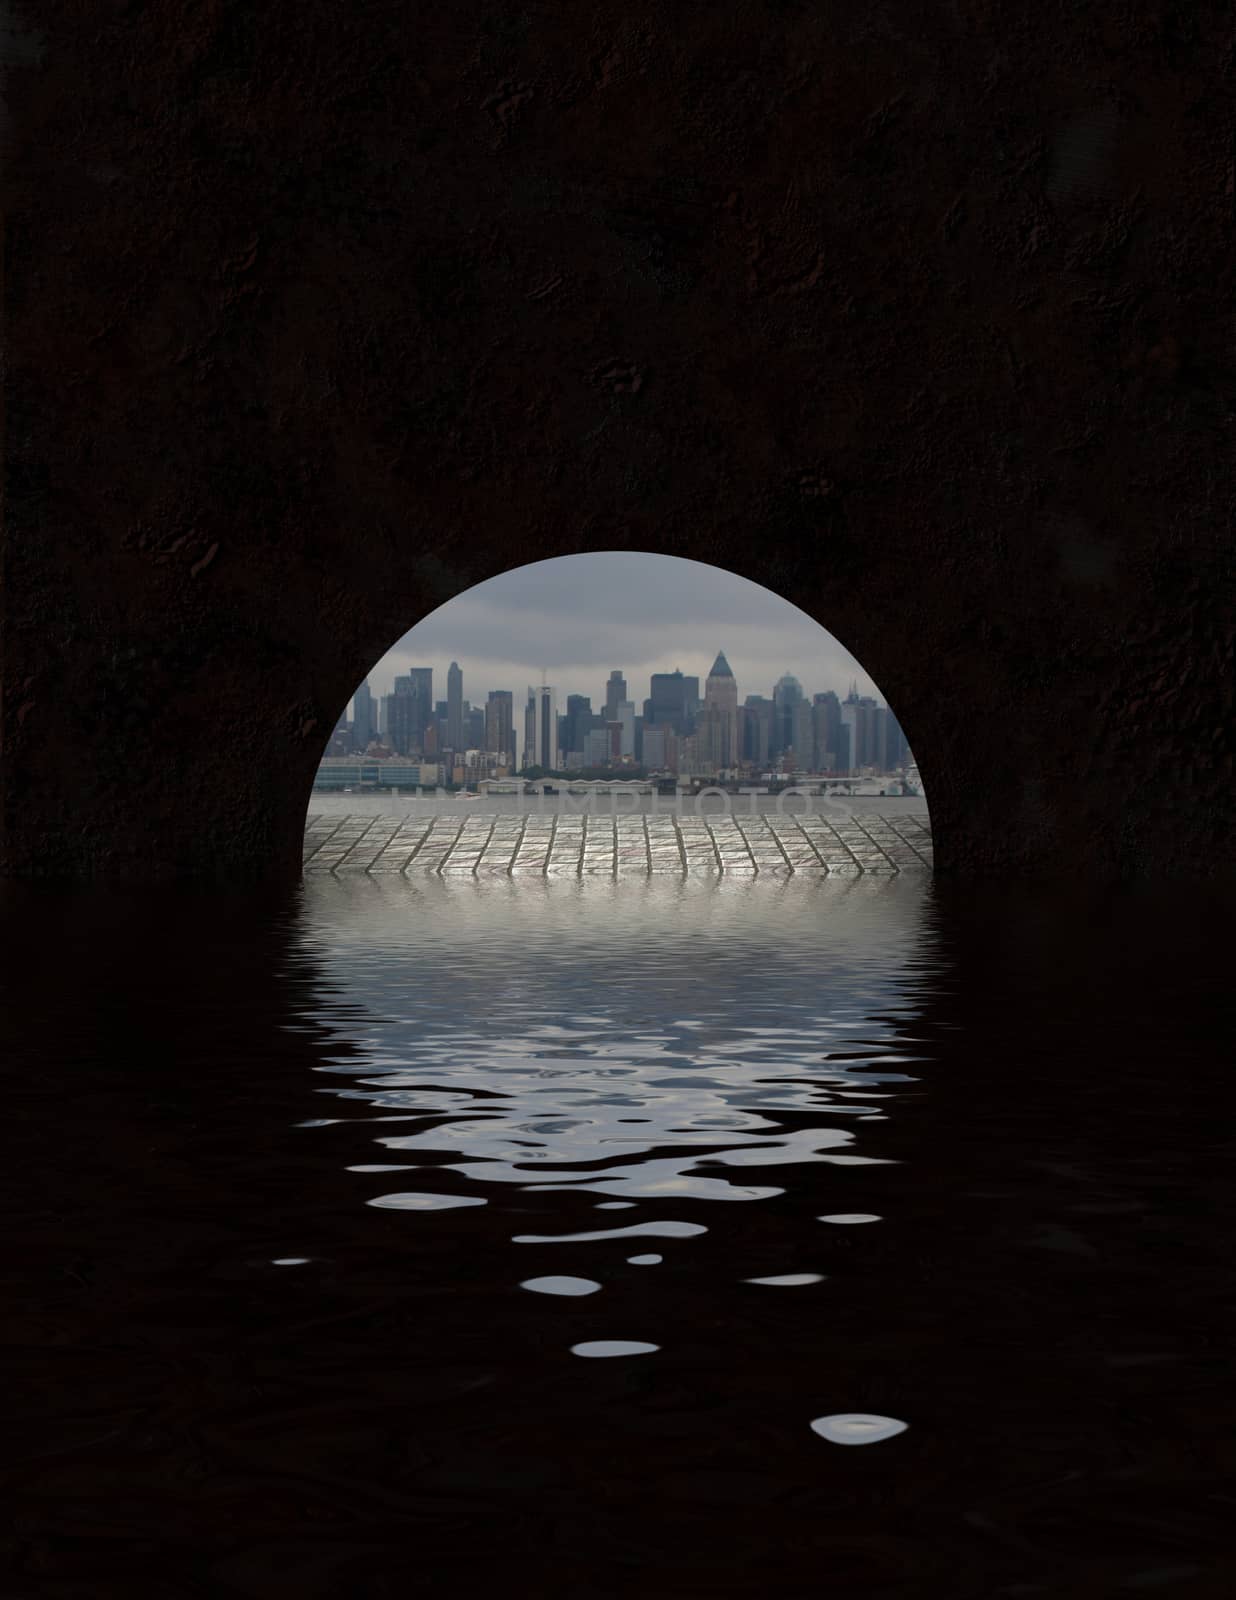 City seen from tunnel opening by applesstock